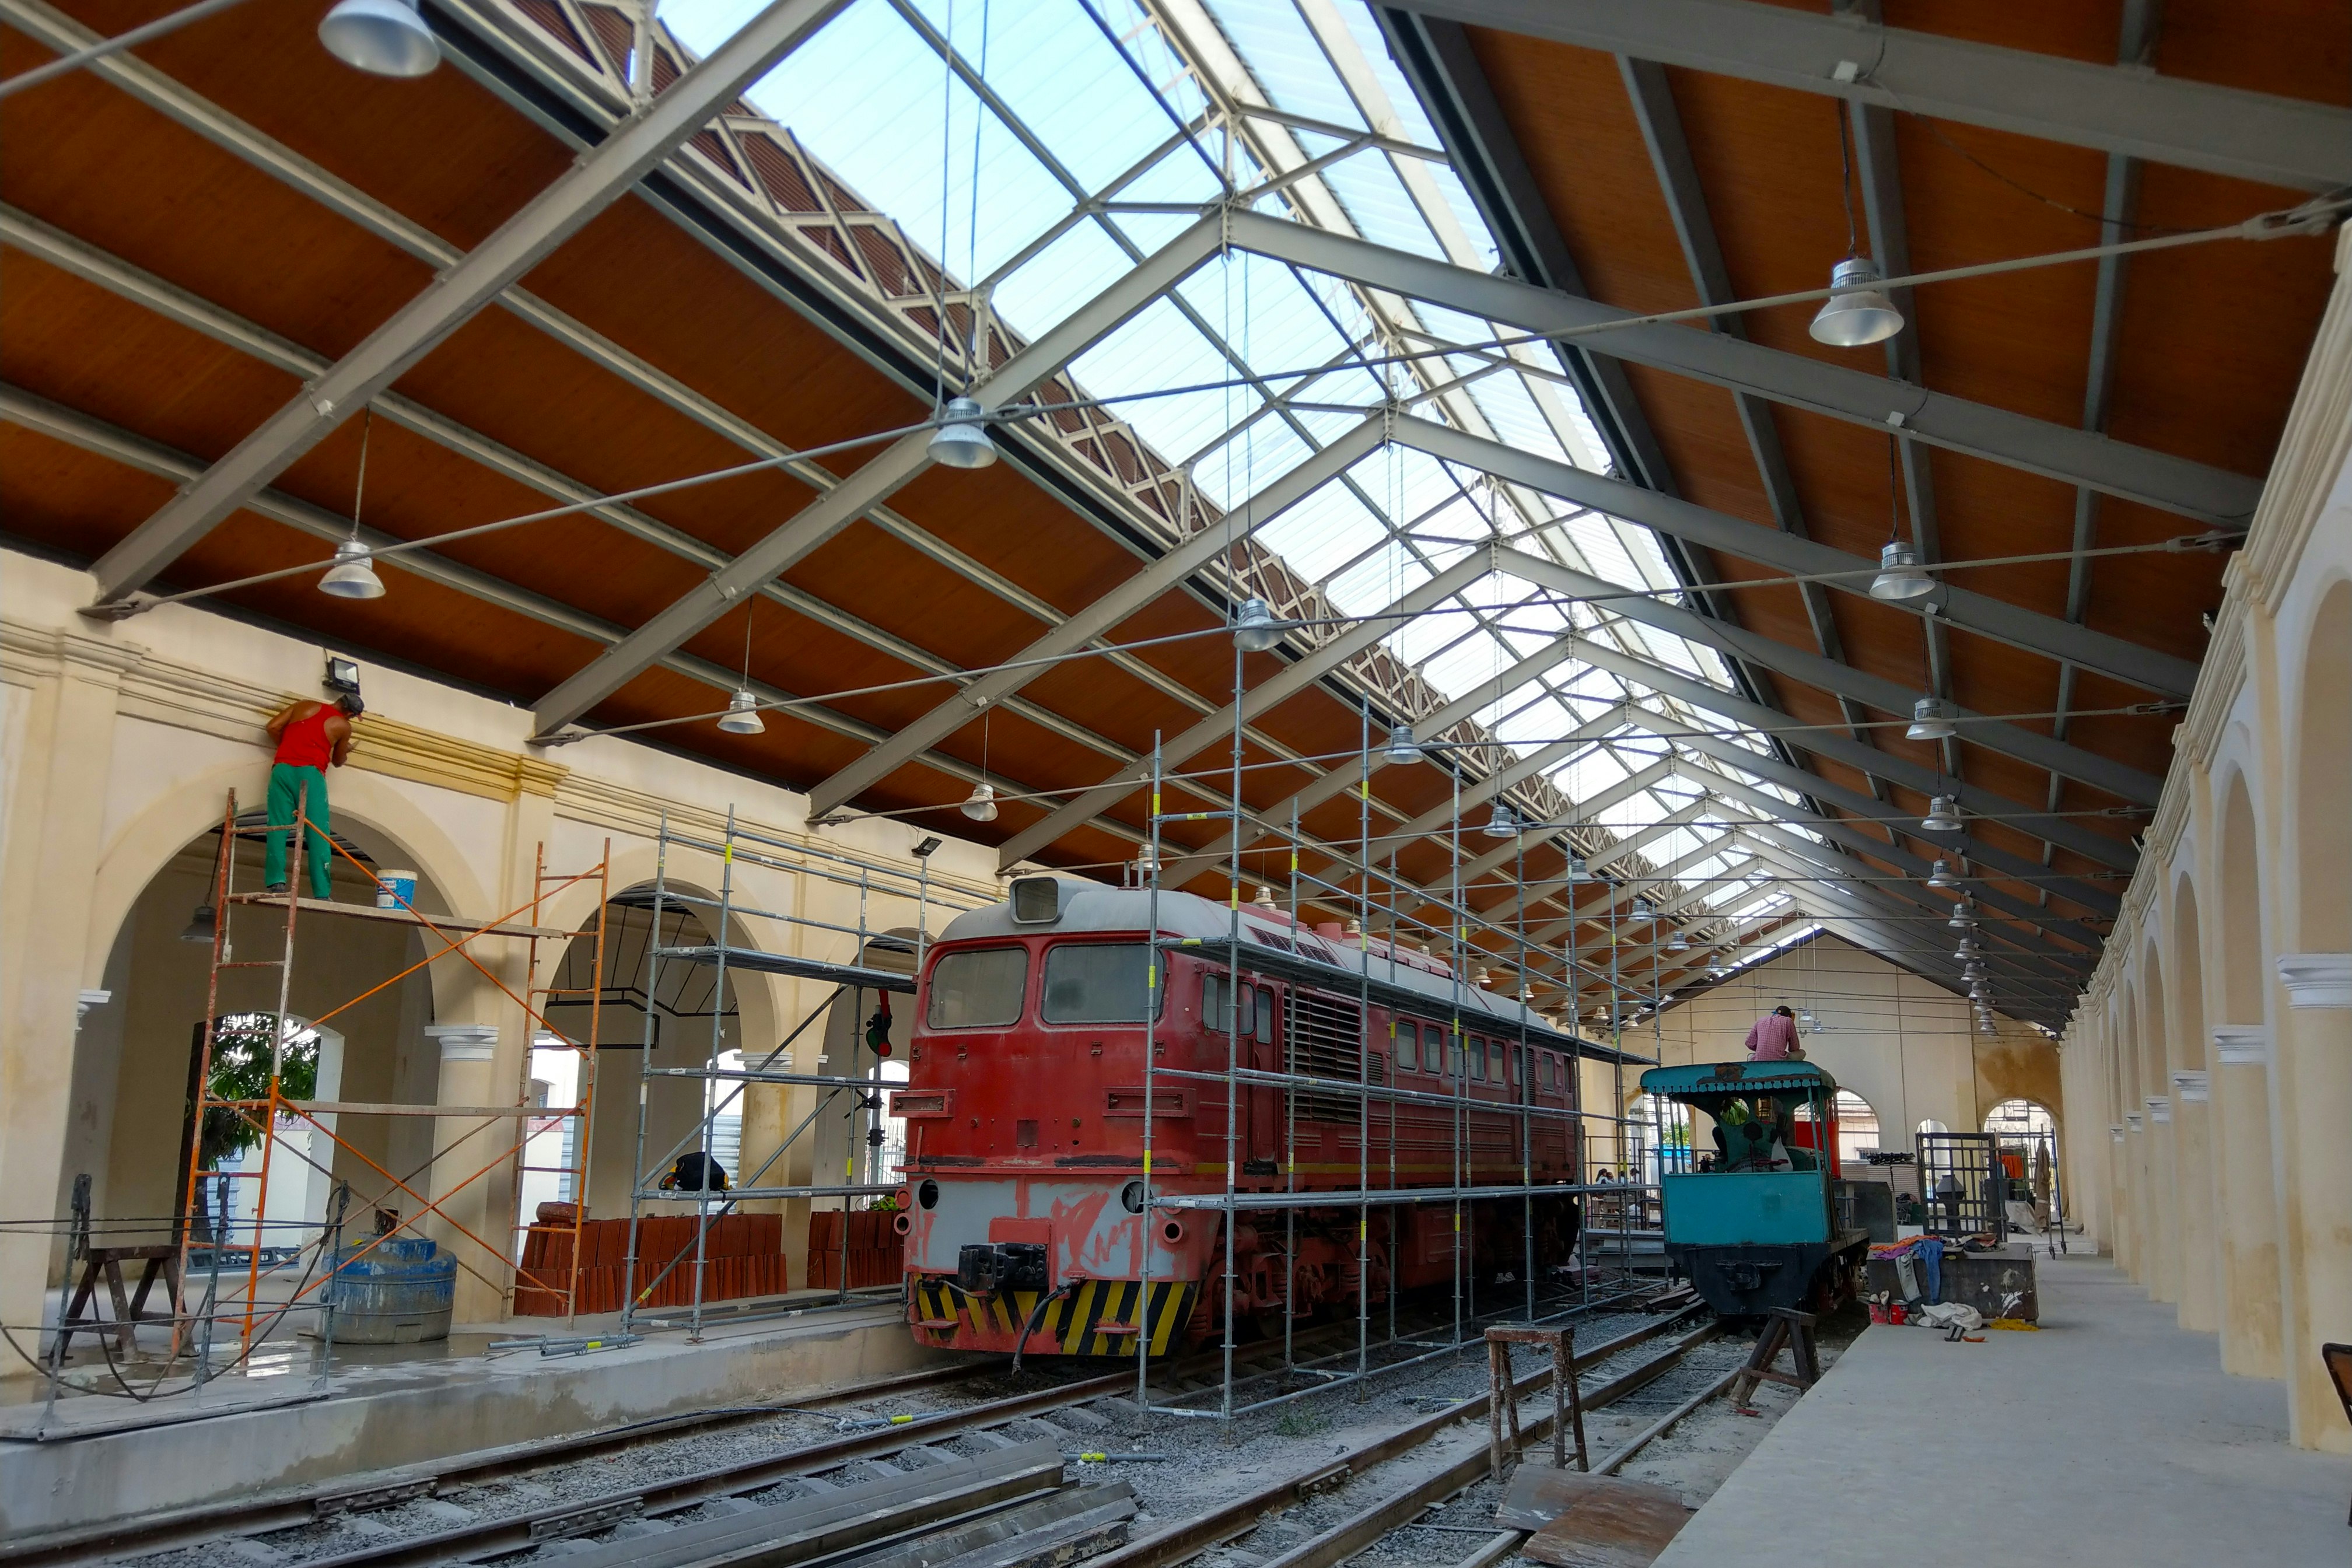 Scaffolding surrounds an old locomotives in an old train station in Havana, In the background, men work on the interior of the train station; Historic Havana sites 